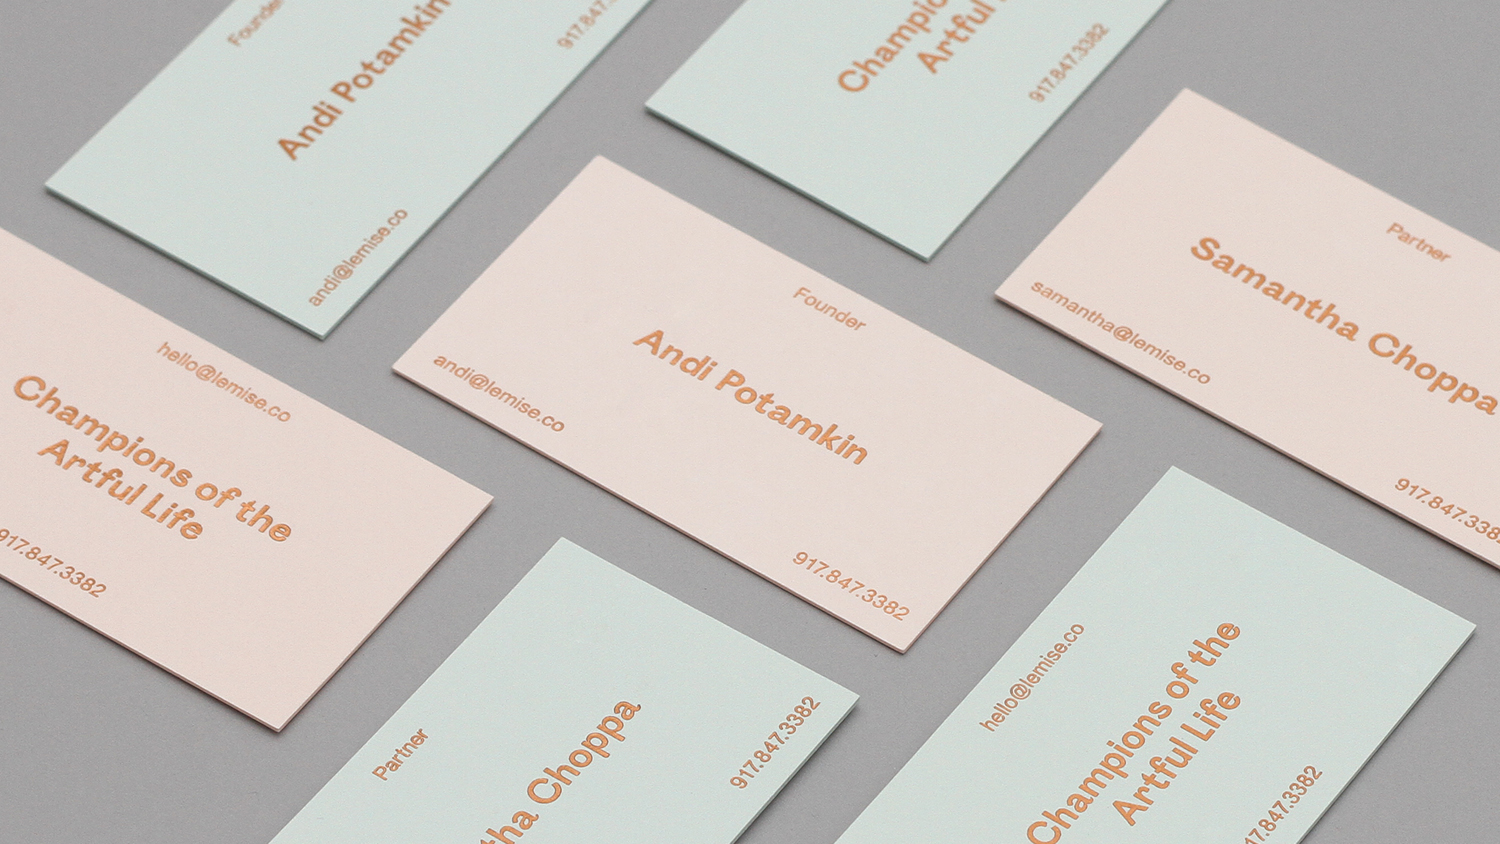 Brand identity and pastel coloured paper and coper block foil business cards for Brooklyn based art and design advisory business LeMise by DIA